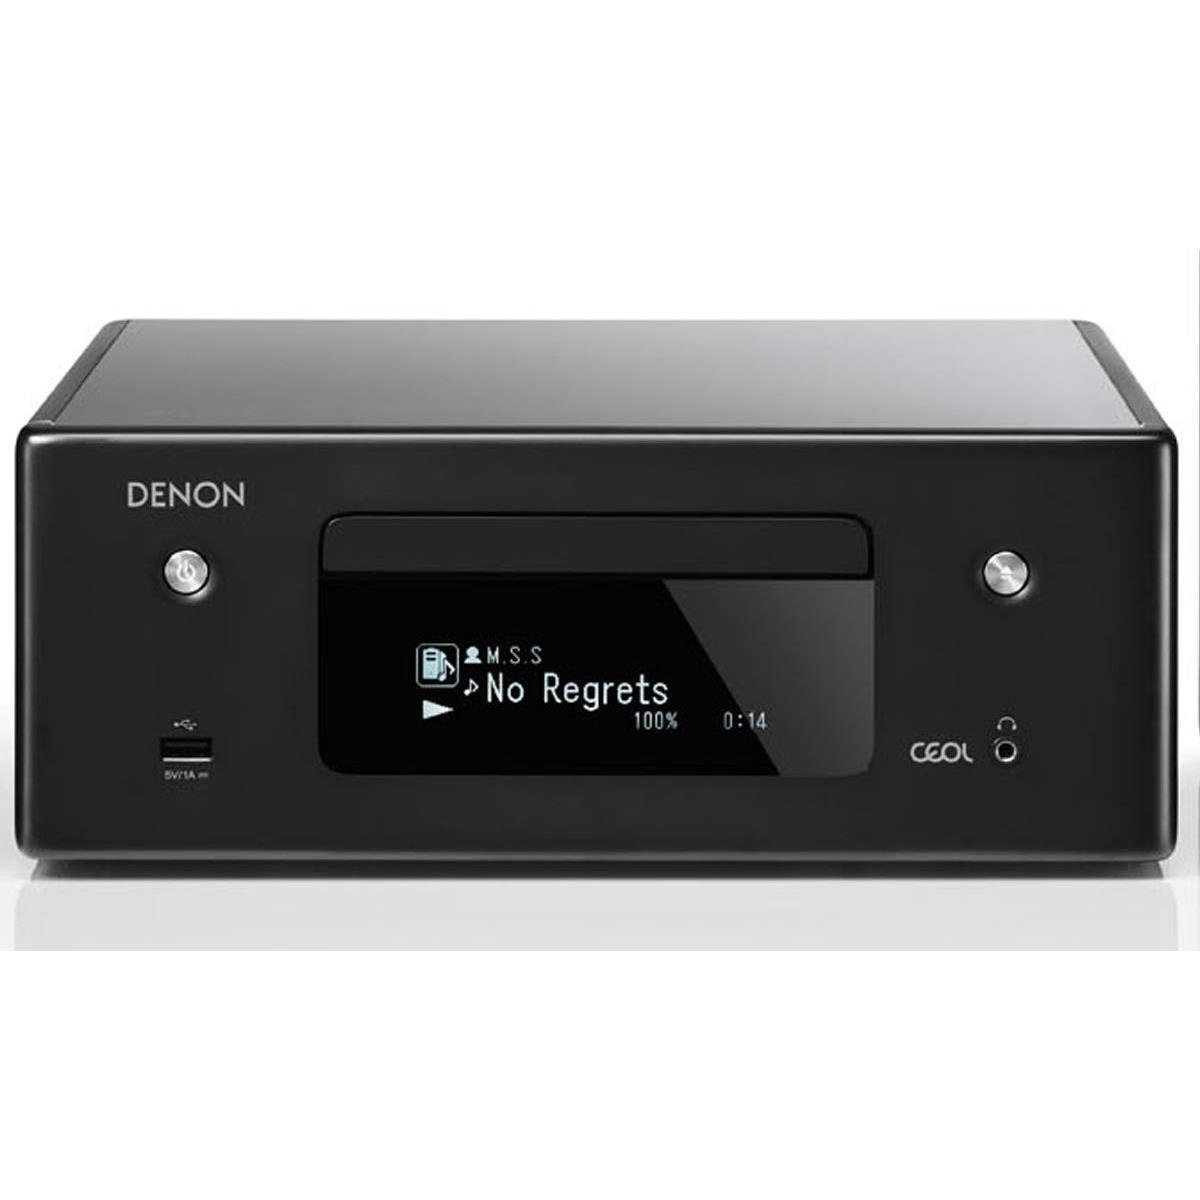 Image of Denon RCD-N10 Hi-Fi Network CD Receiver with HEOS Music Streaming